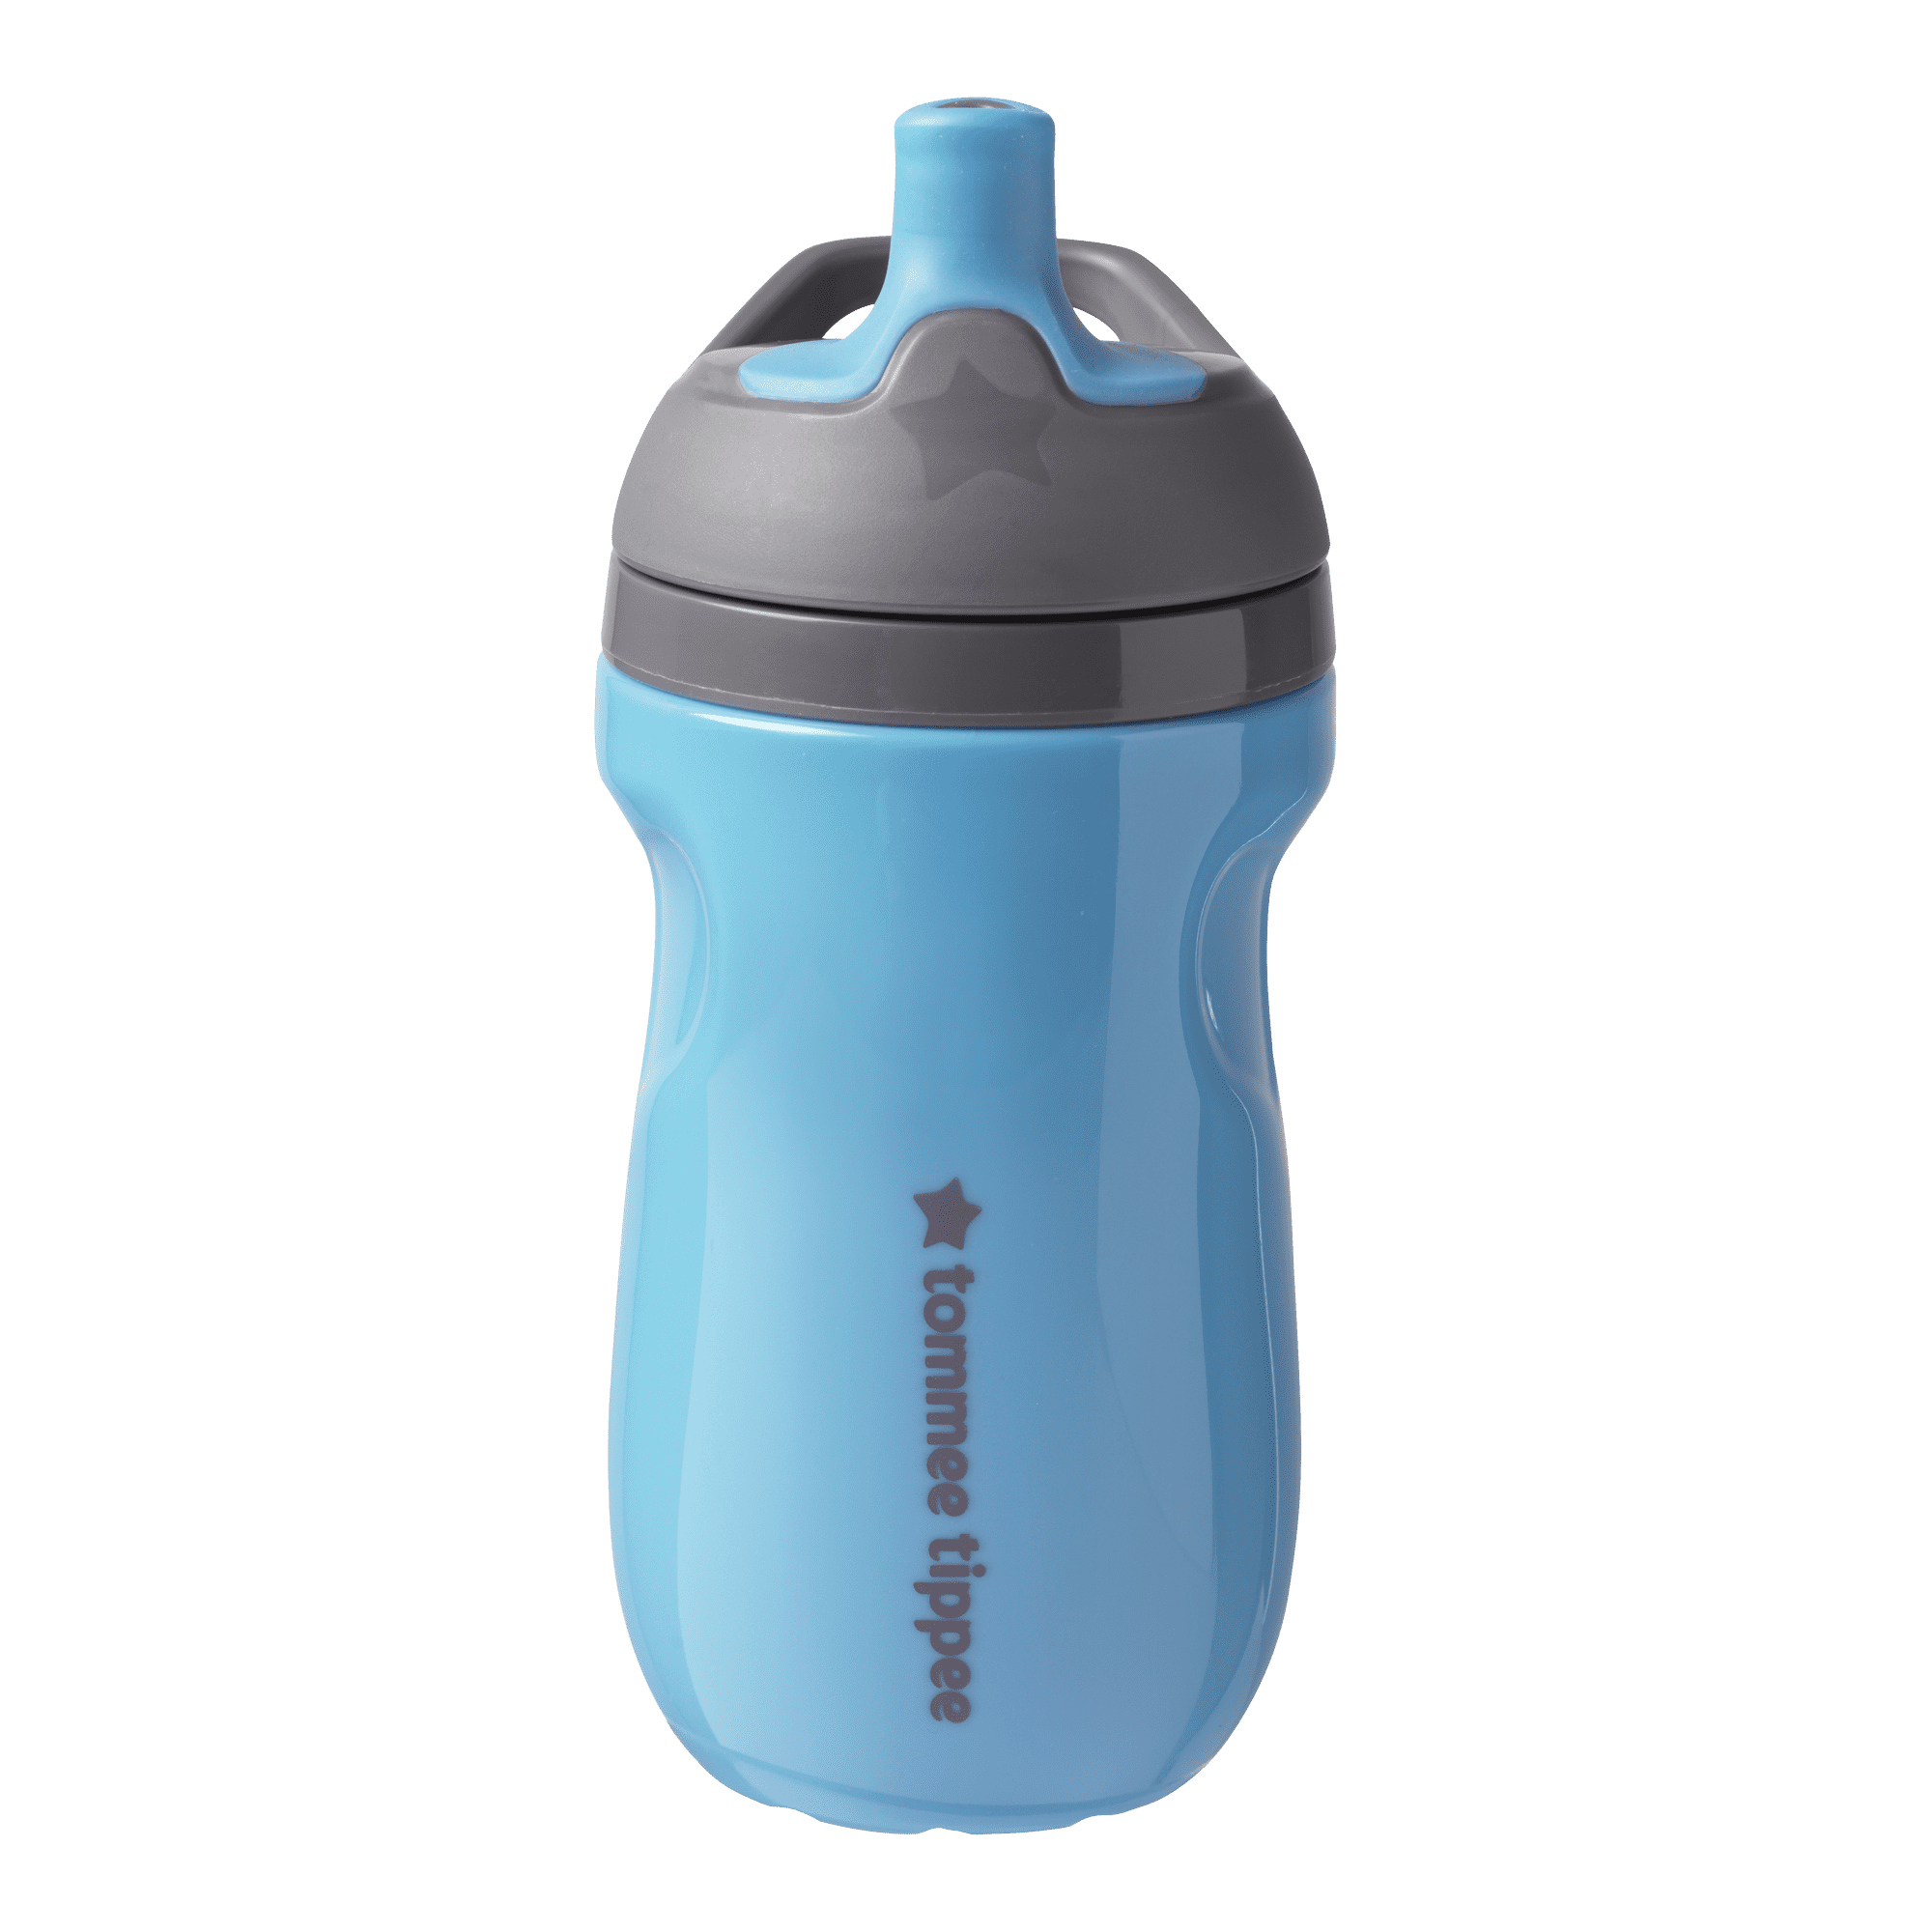 Tommee Tippee 10oz Sportee Bottle, 1pk (Colors May Vary) 